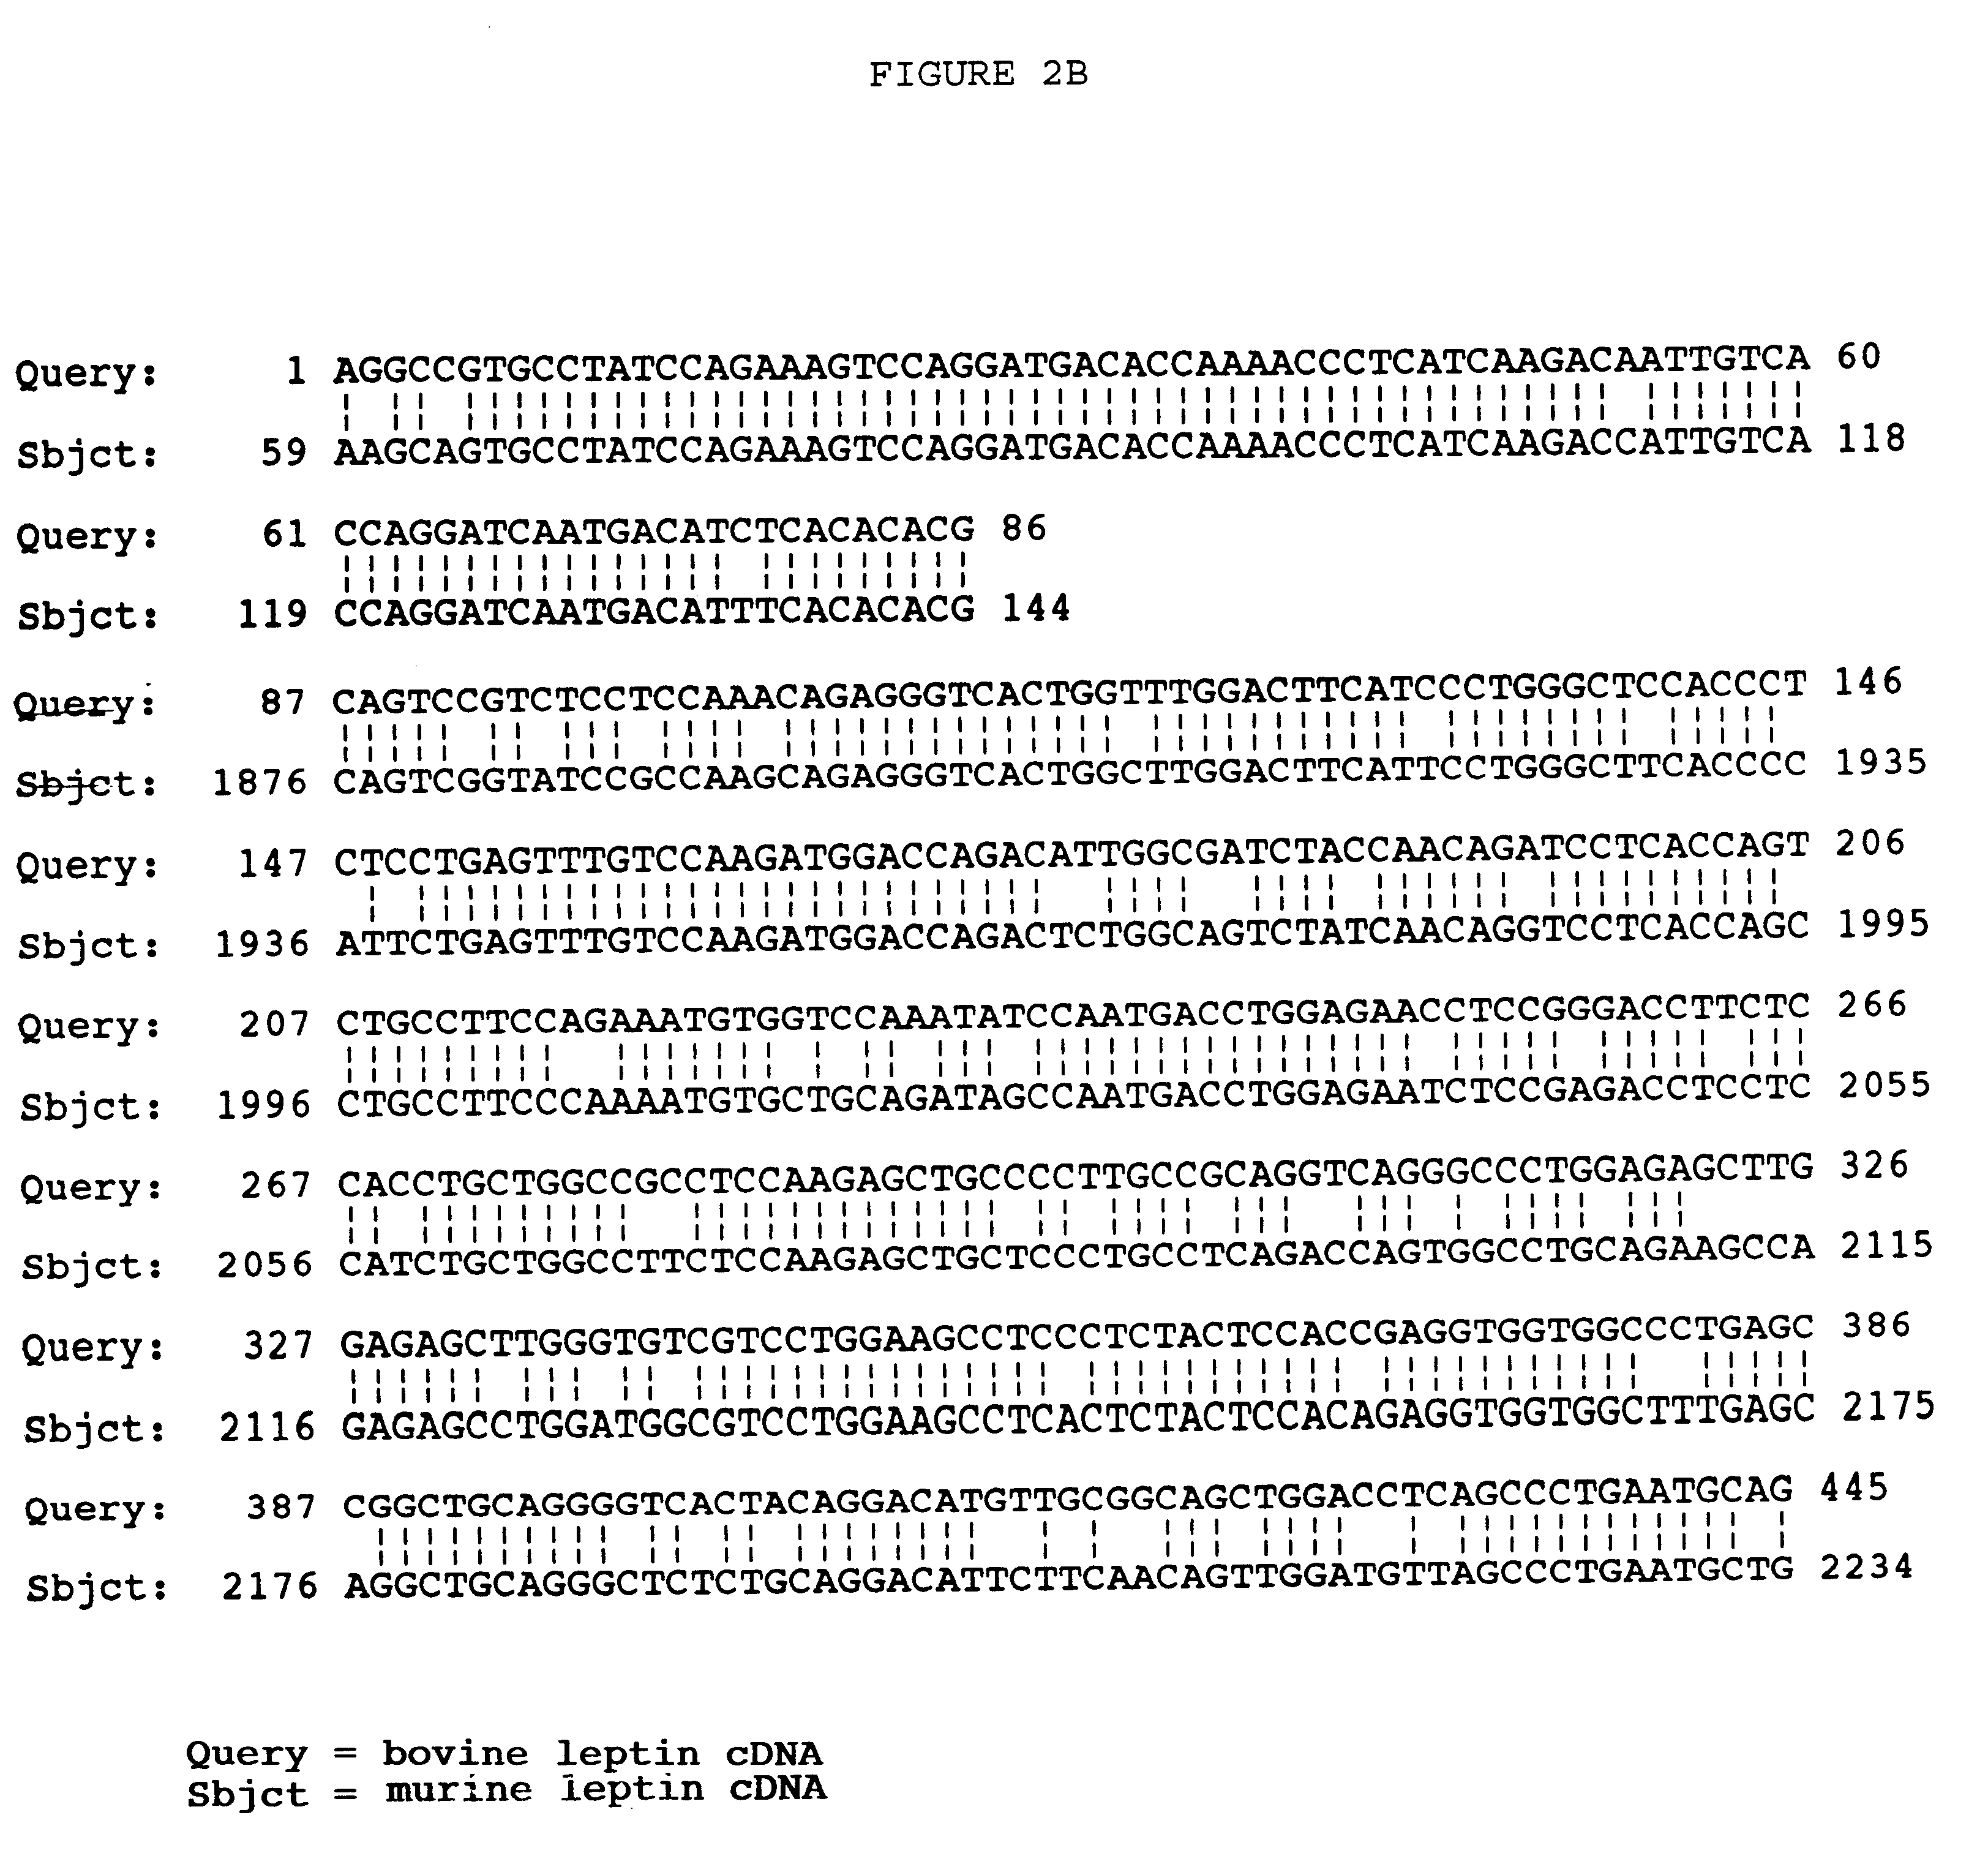 Bovine leptin protein, nucleic acid sequences coding therefor and uses thereof